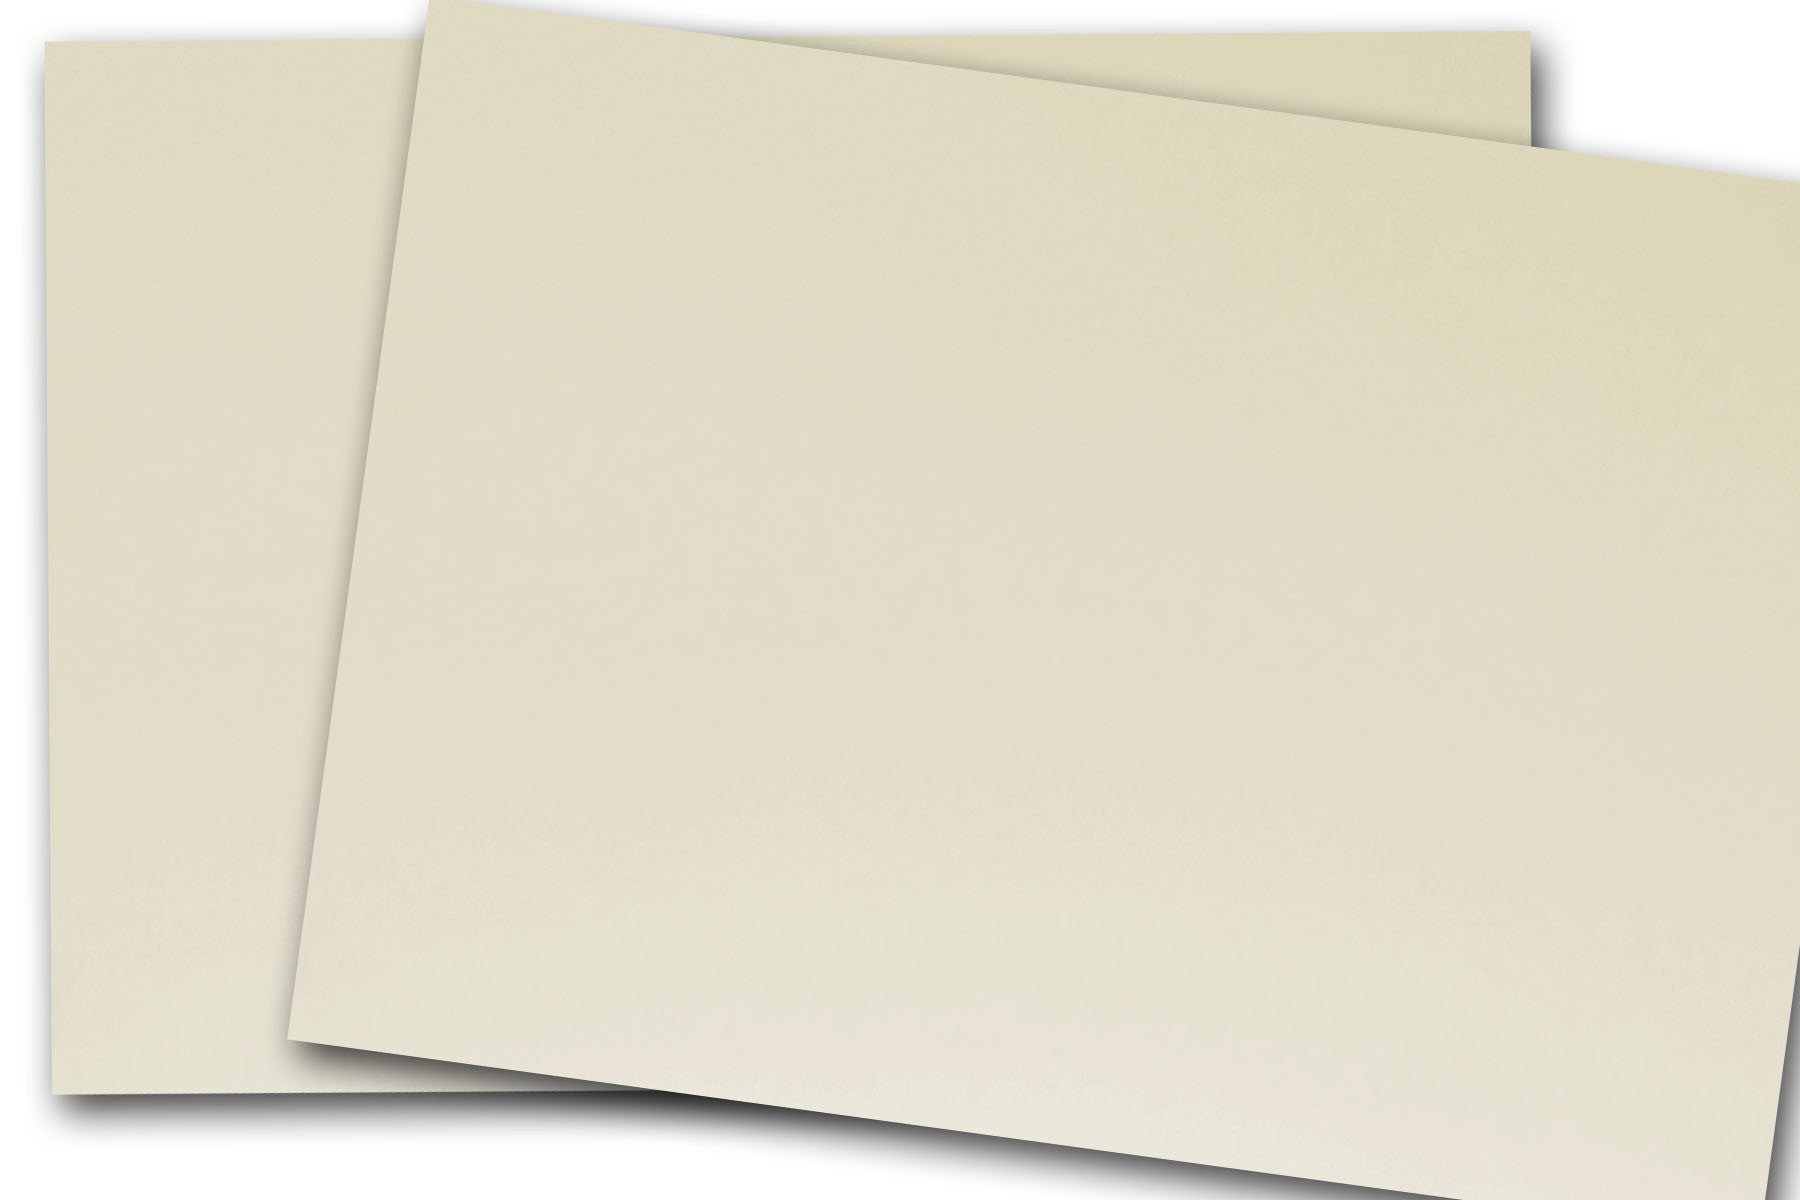 CLASSIC CREST 8.5 x 11 Paper - Recycled 100 Bright White - 24lb Writing - 5